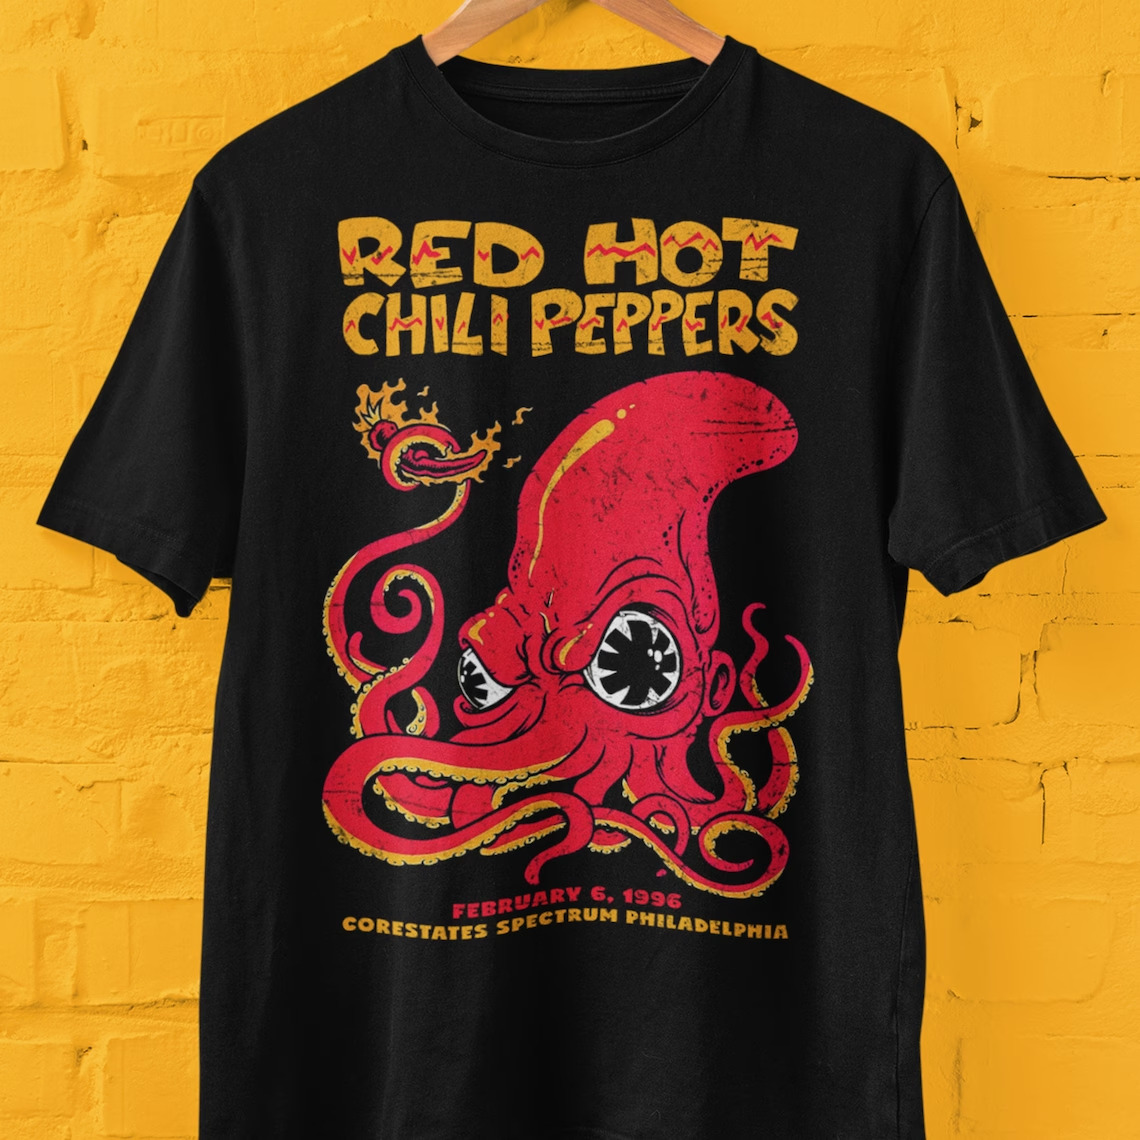 Vintage Red Hot Chili Peppers Rock Music Tour 1996 Black T-Shirt Gift Fans